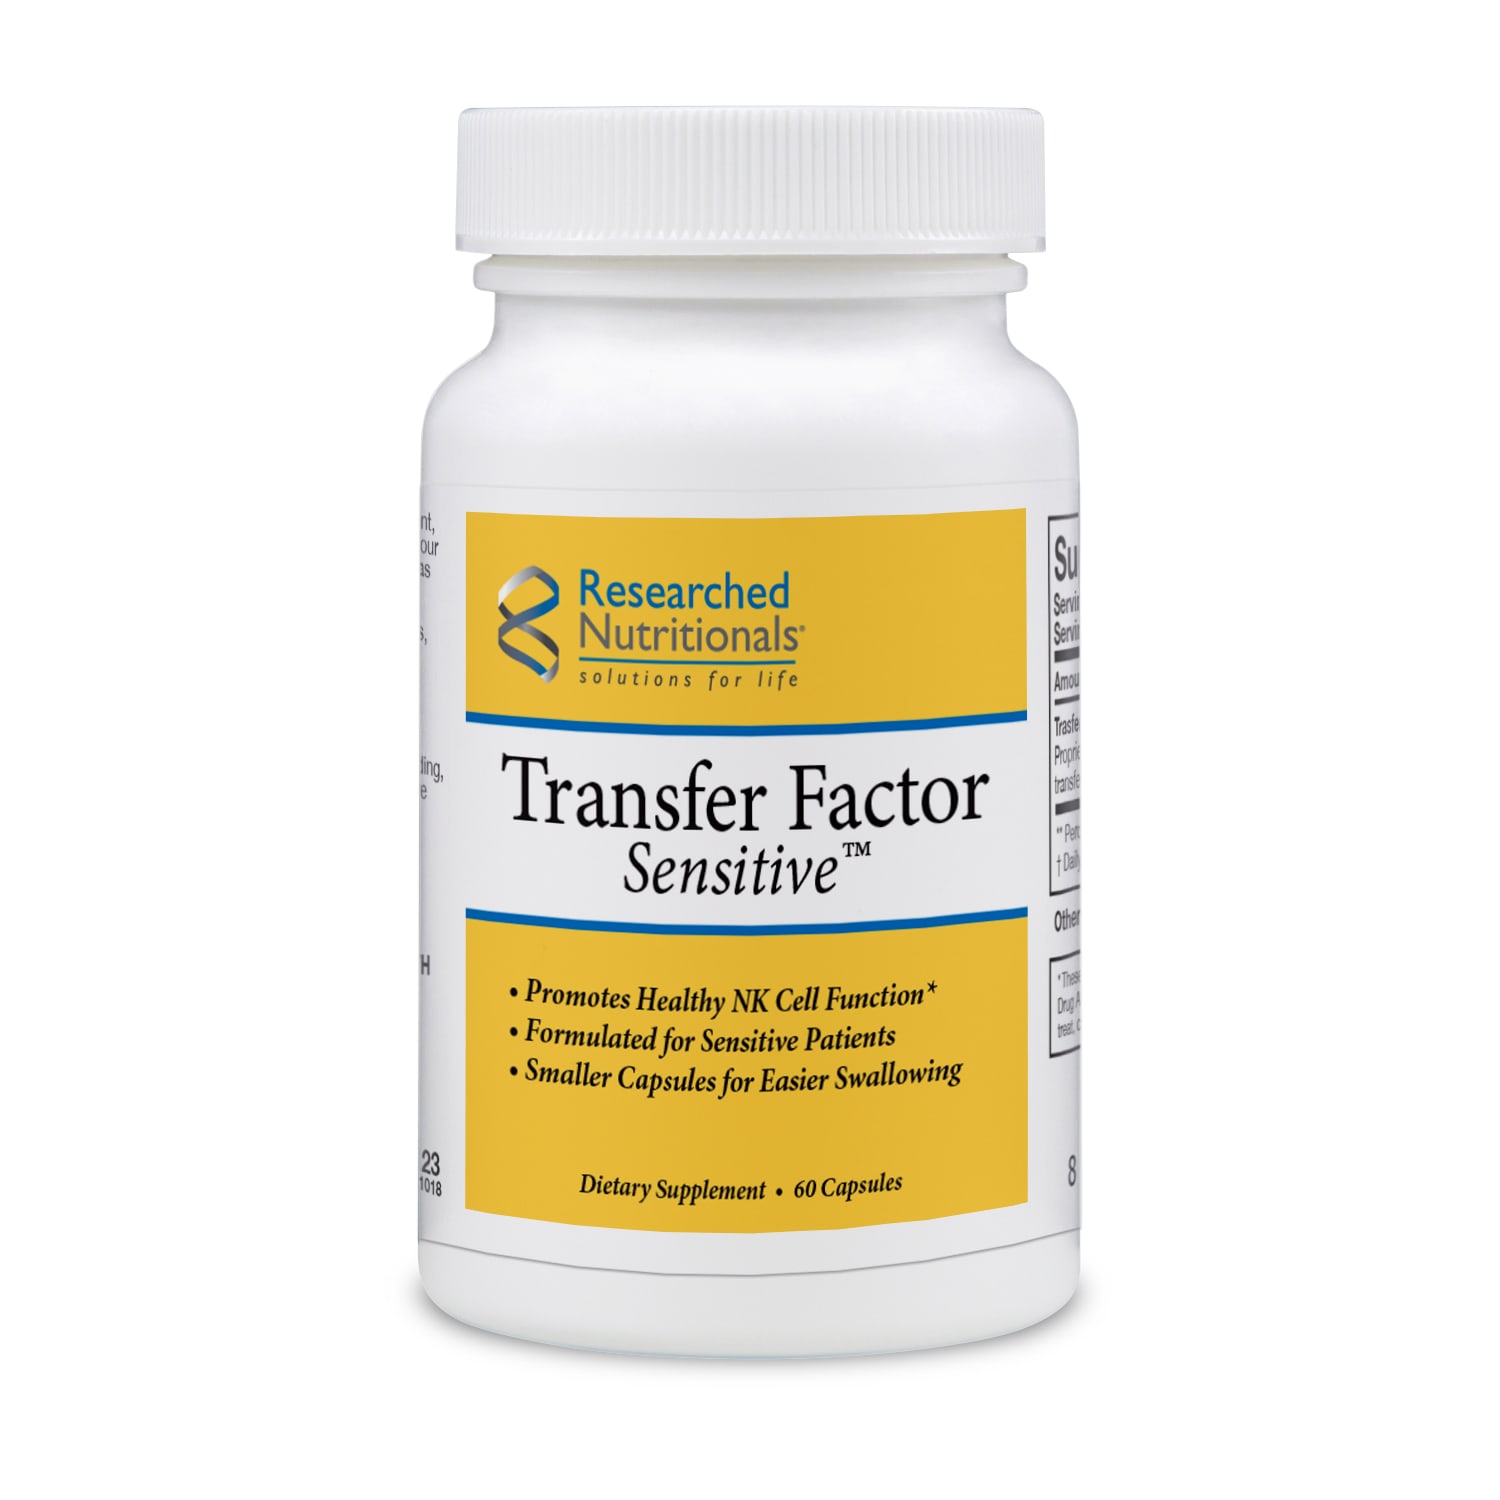 RESEARCHED NUTRITIONALS - Transfer Factor Sensitive